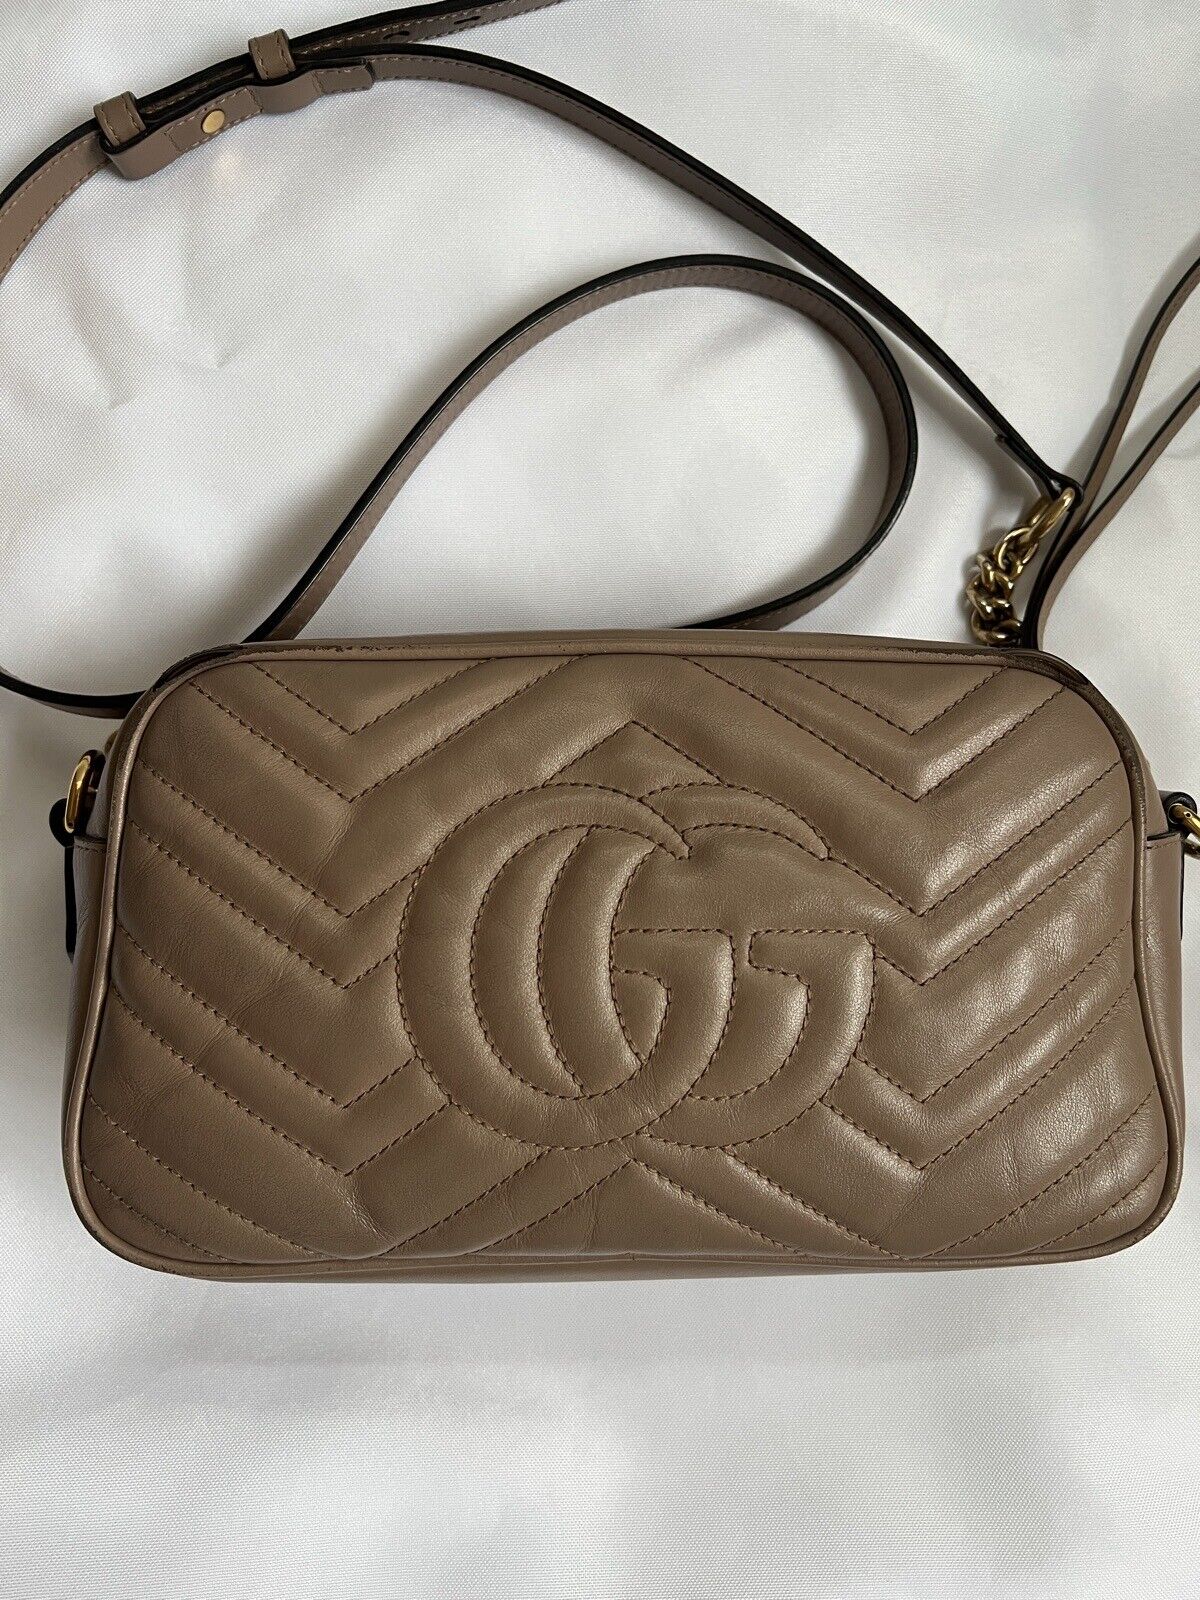 Authentic GUCCI Small Marmont Handbag in Dusty Pi… - image 6